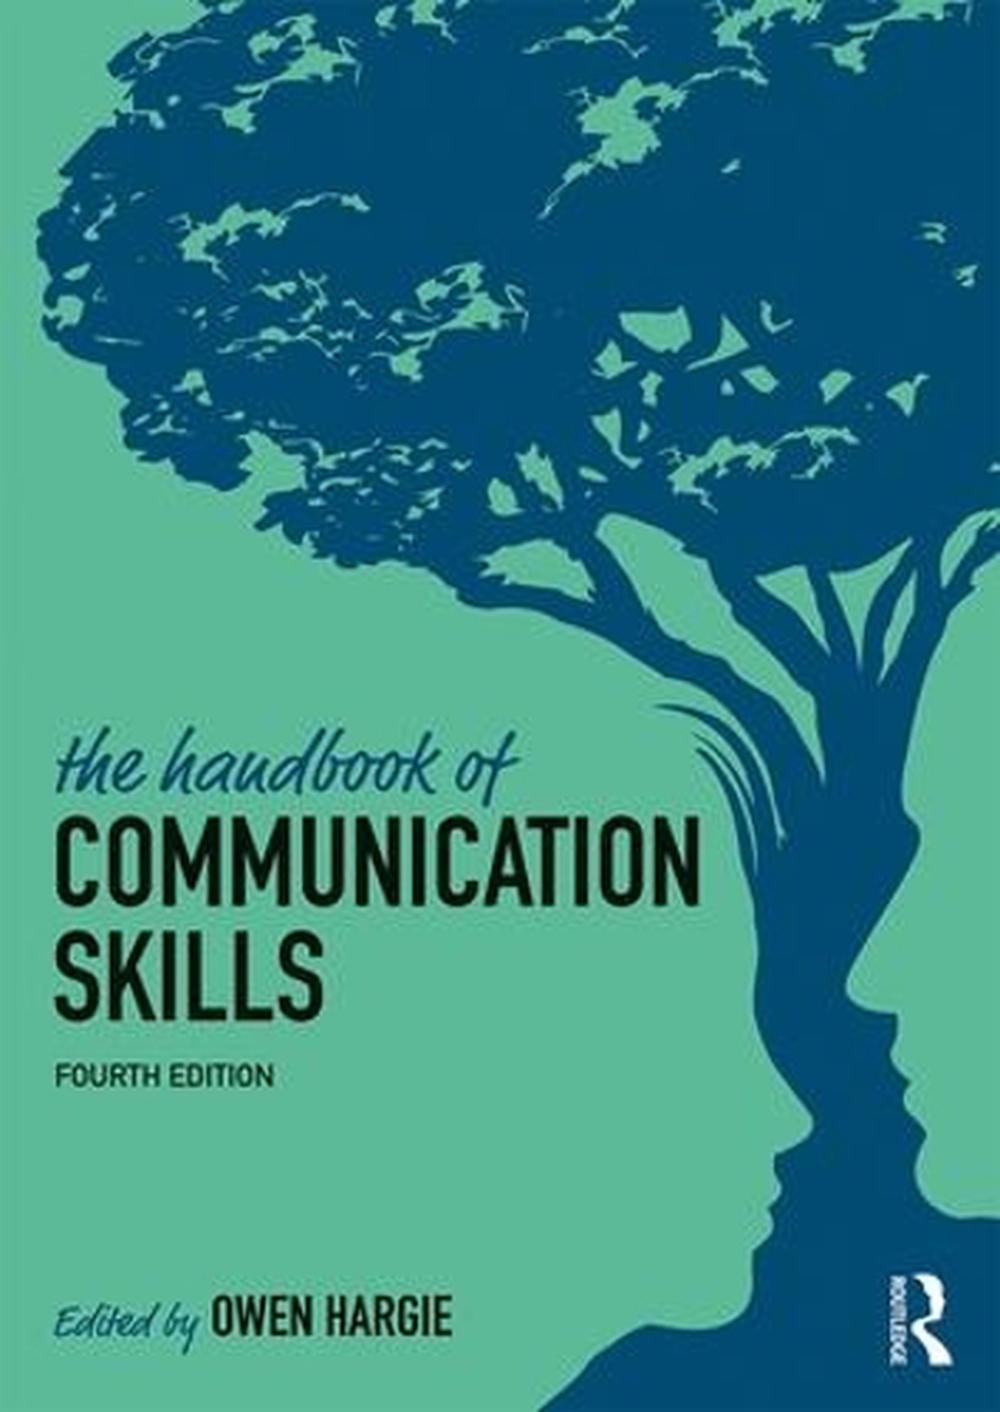 research title about communication skills